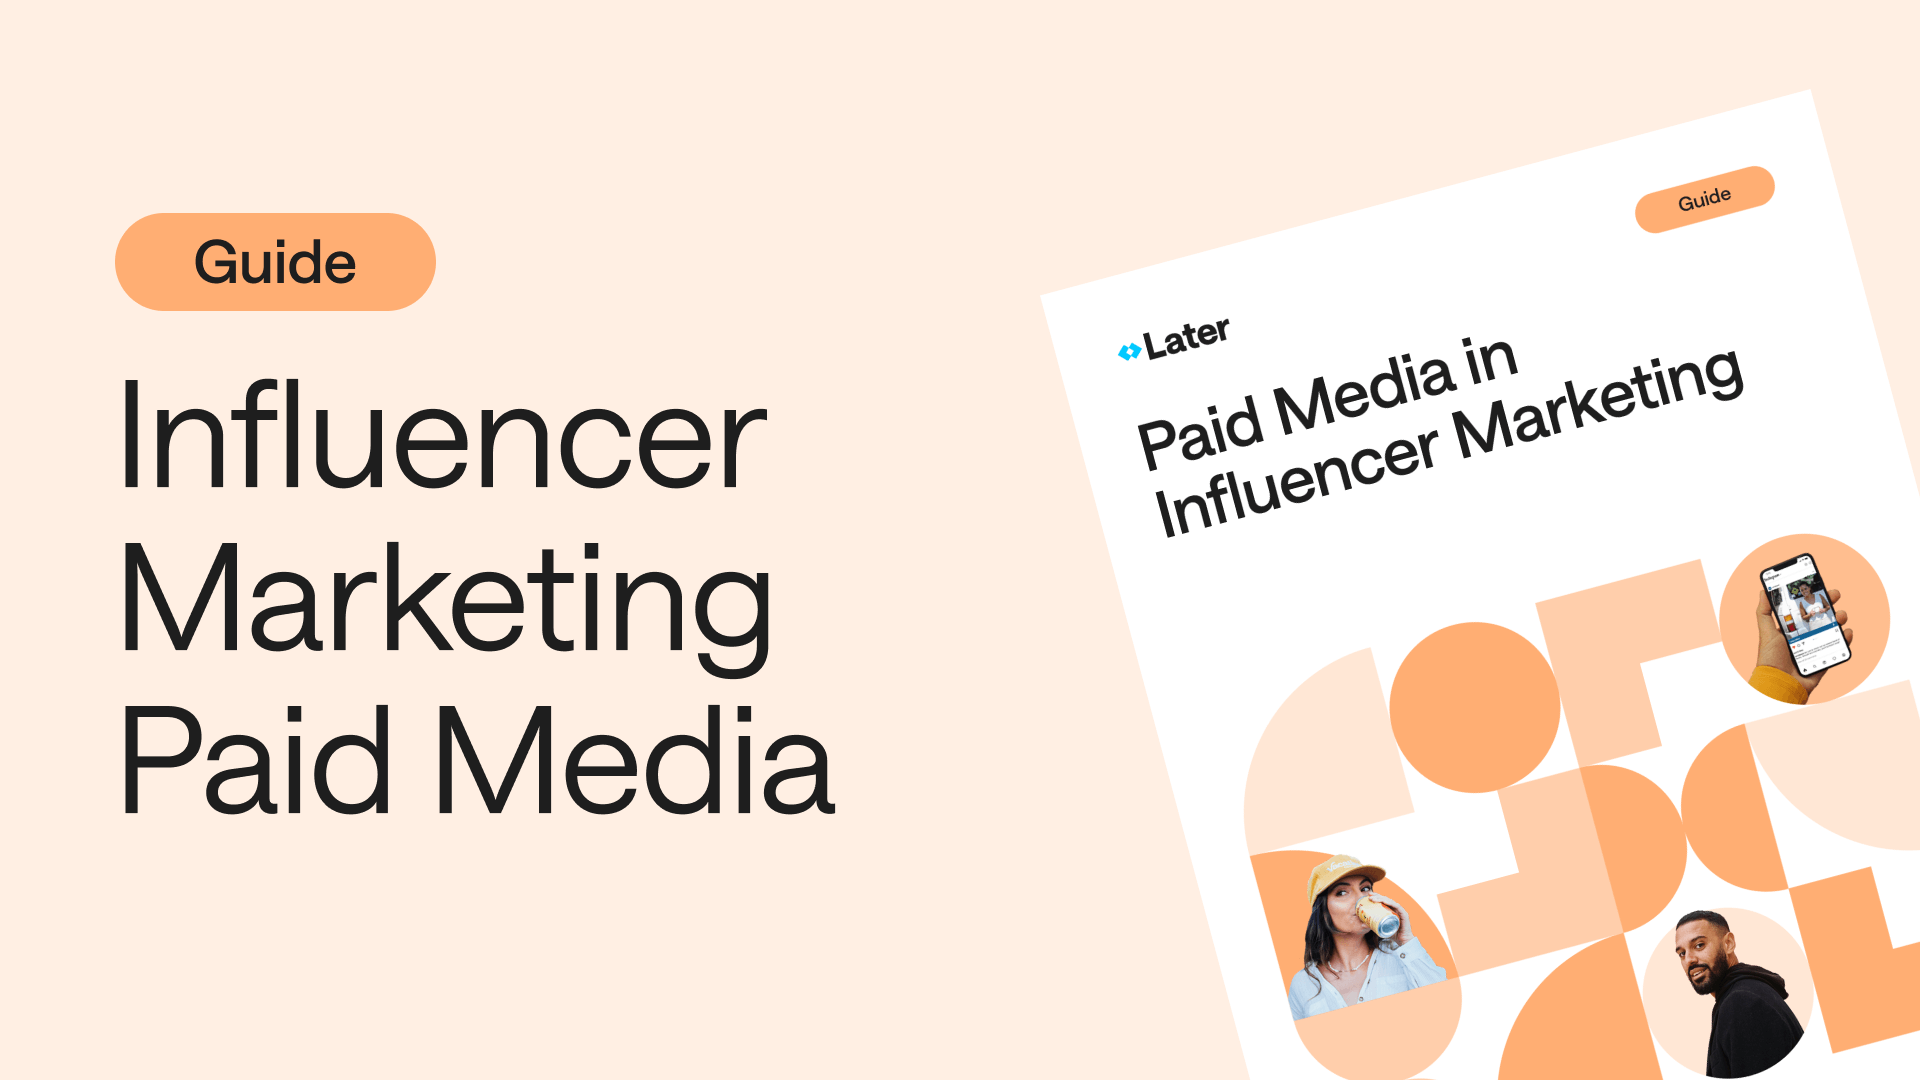 Case Study, The Complete Guide to Influencer Marketing